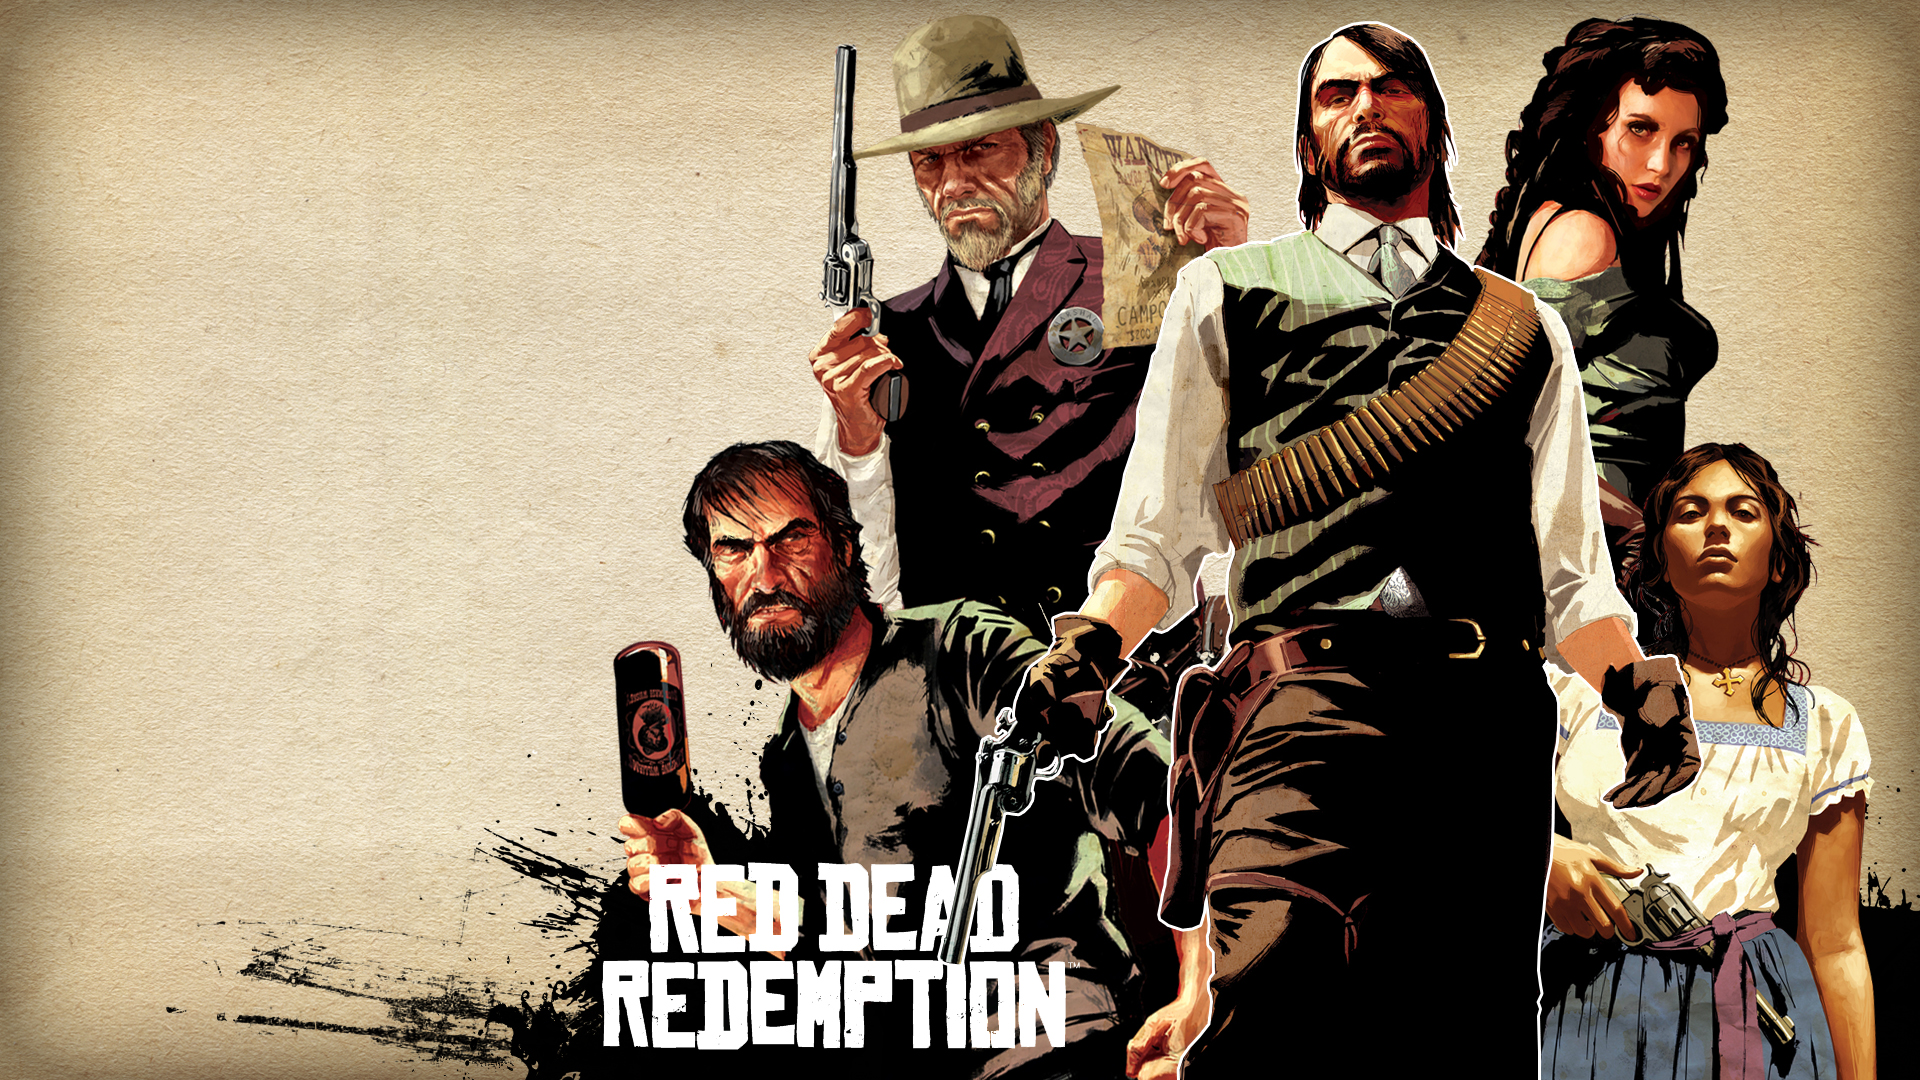 HQ Red Dead Redemption Wallpapers | File 2032.72Kb